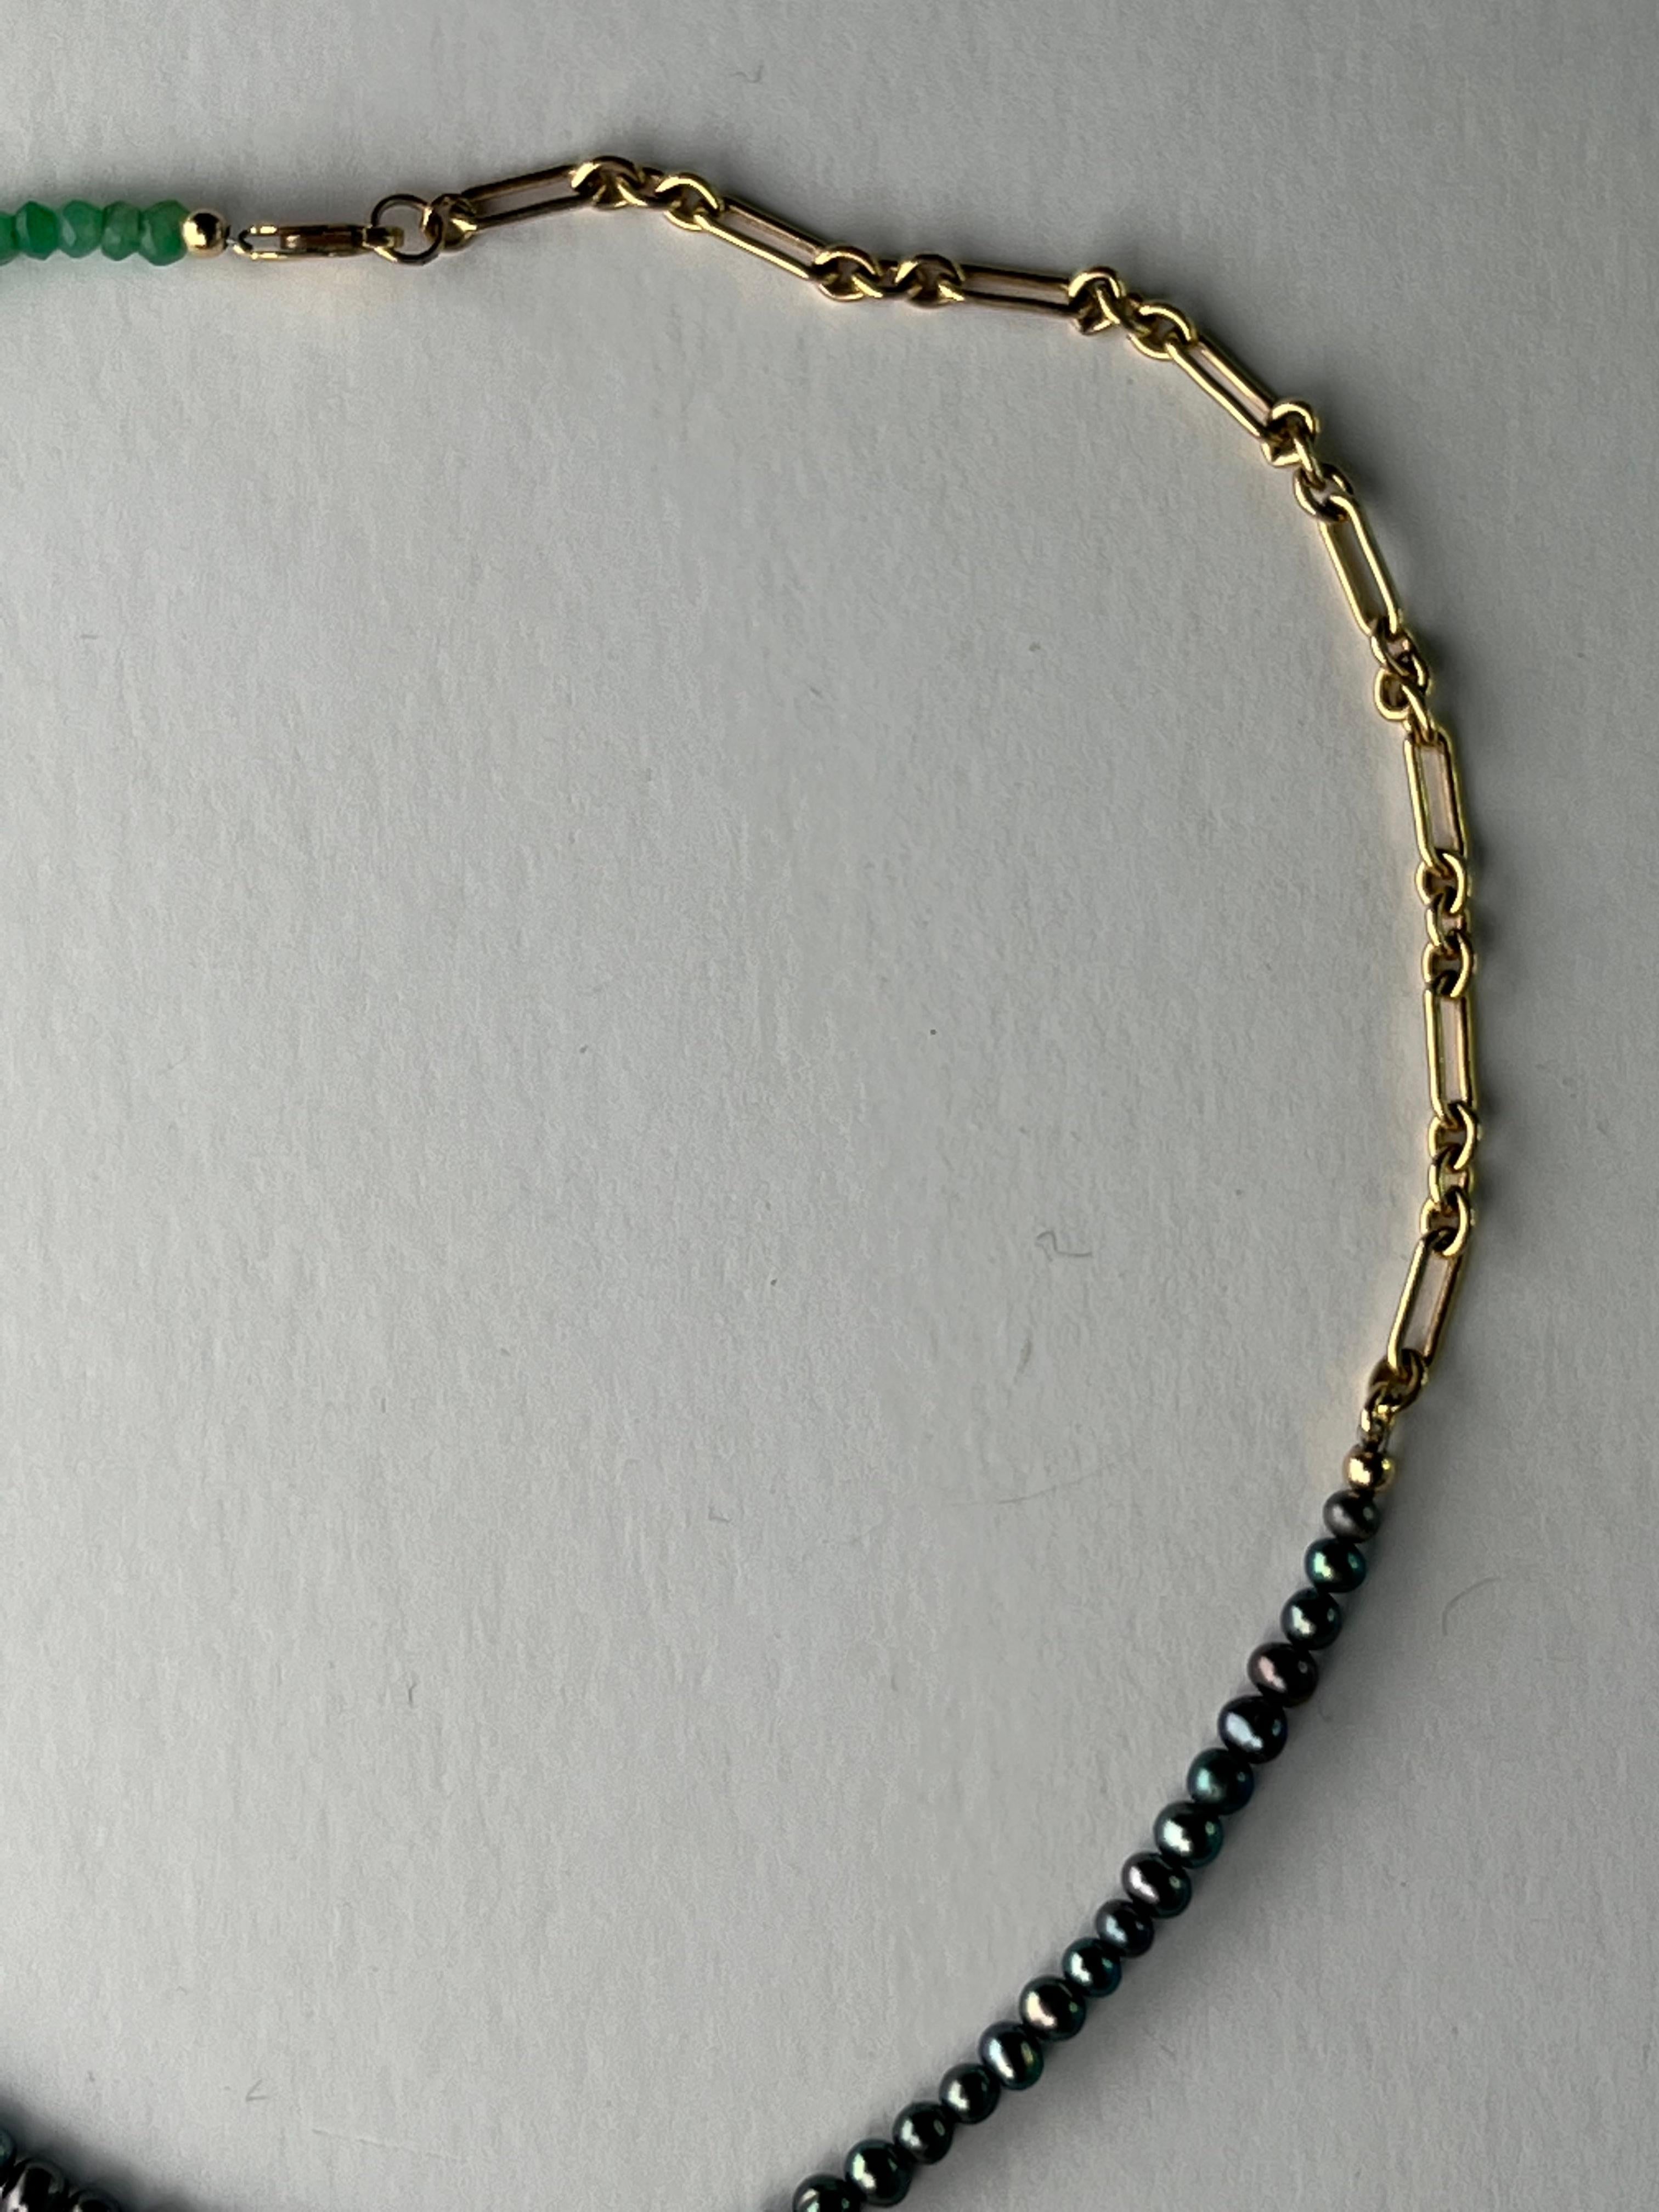 Black Pearl Chrysoprase Choker Necklace Chain J Dauphin For Sale 4